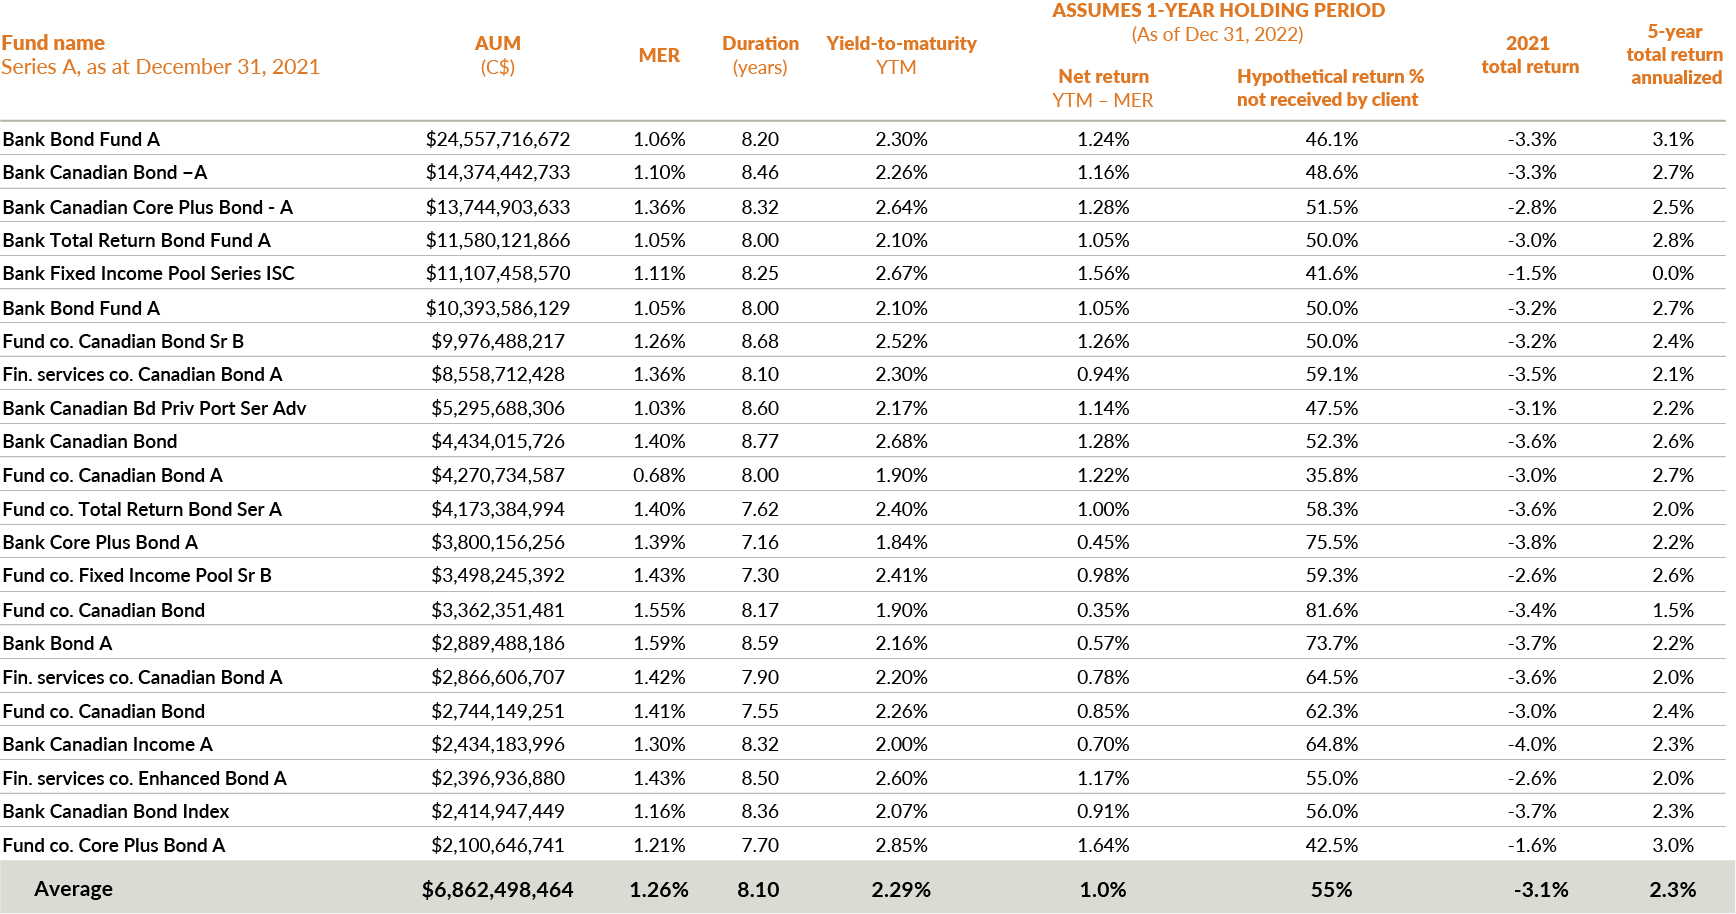 A table showing statistics for mutual funds categorized in the canadian Fixed Income category at the end of 2021. On average, the funds at an AUM of $6.8 billion, 1.26% MER, 8.0 year duration and 2.29% yield-to-maturity. This meant that the net return, based on a yield minus MER was 1.0%. This meant that 55% of the yield was taken away by management fees. As at December 31, 2021, the average total return for the funds was -3.1% in 2021, and the annualized five-year return was 2.1%.